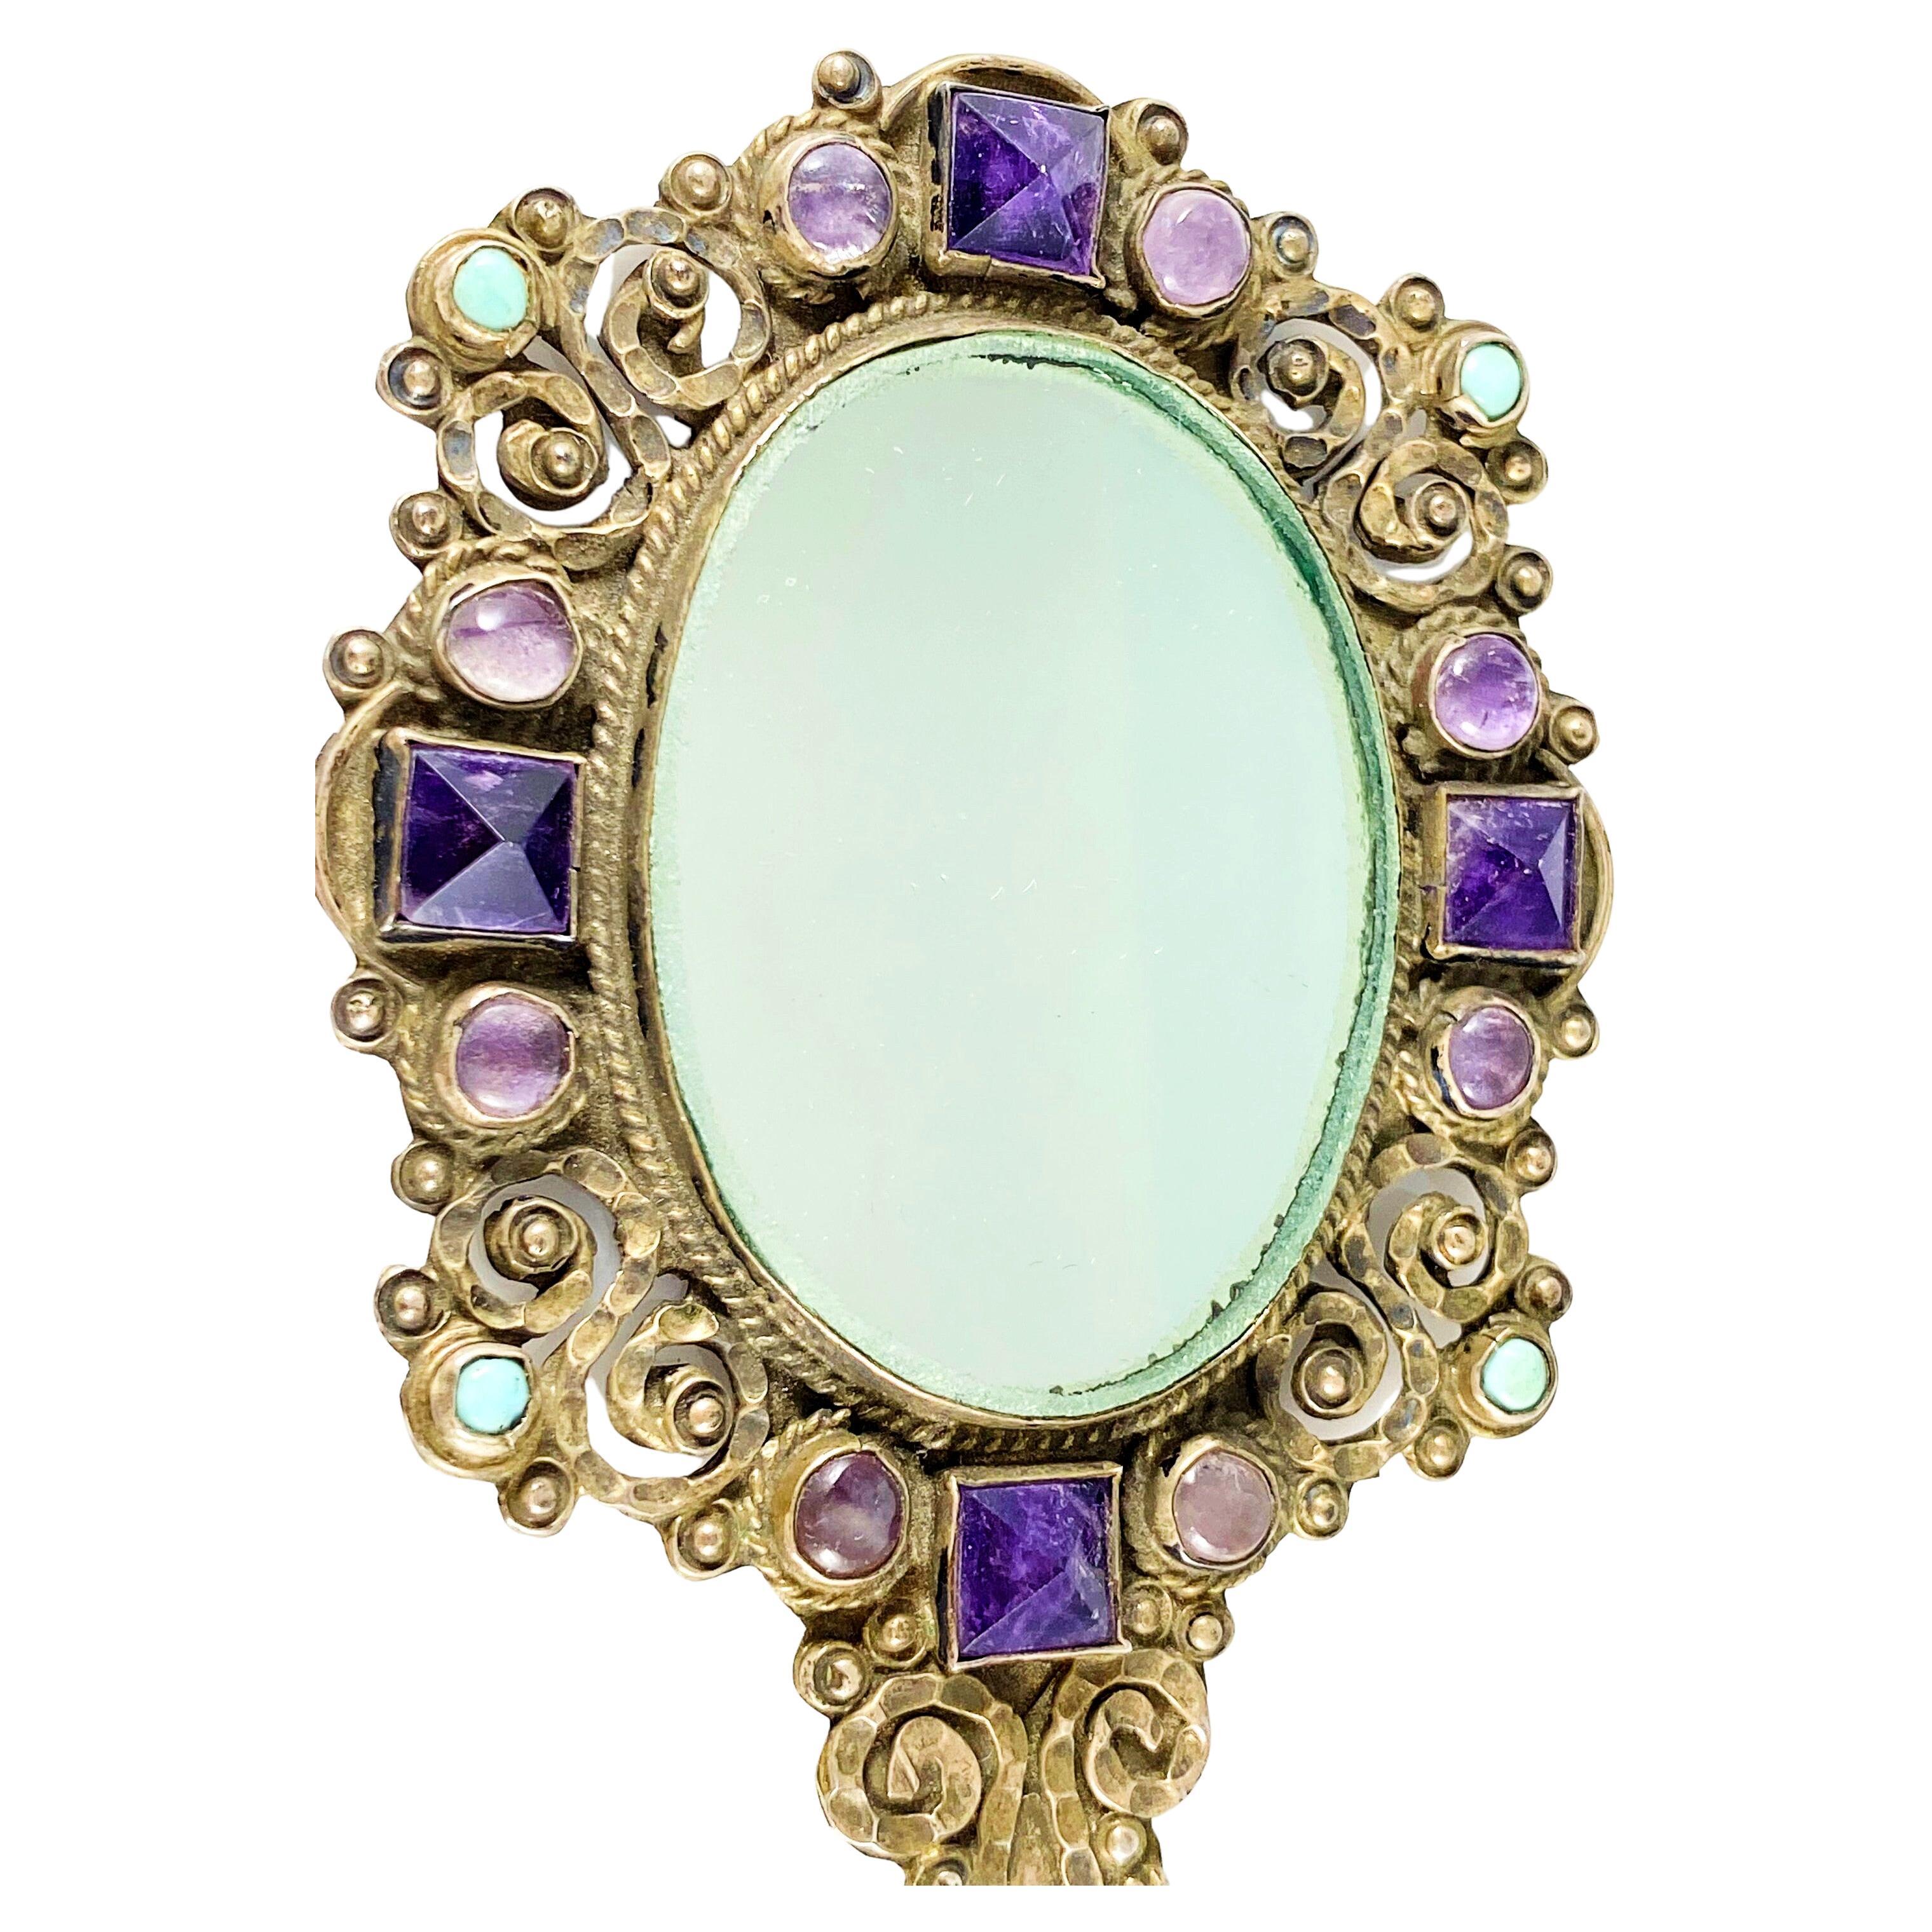 A gorgeous vintage Matl Salas sterling silver vanity mirror, hand-set with 8 lavender amethyst cabochons, 4 deeper purple amethyst pyramid-cut stones, and 4 small turquoise cabochons. This petite, sweet hand mirror features elaborate hand-chased